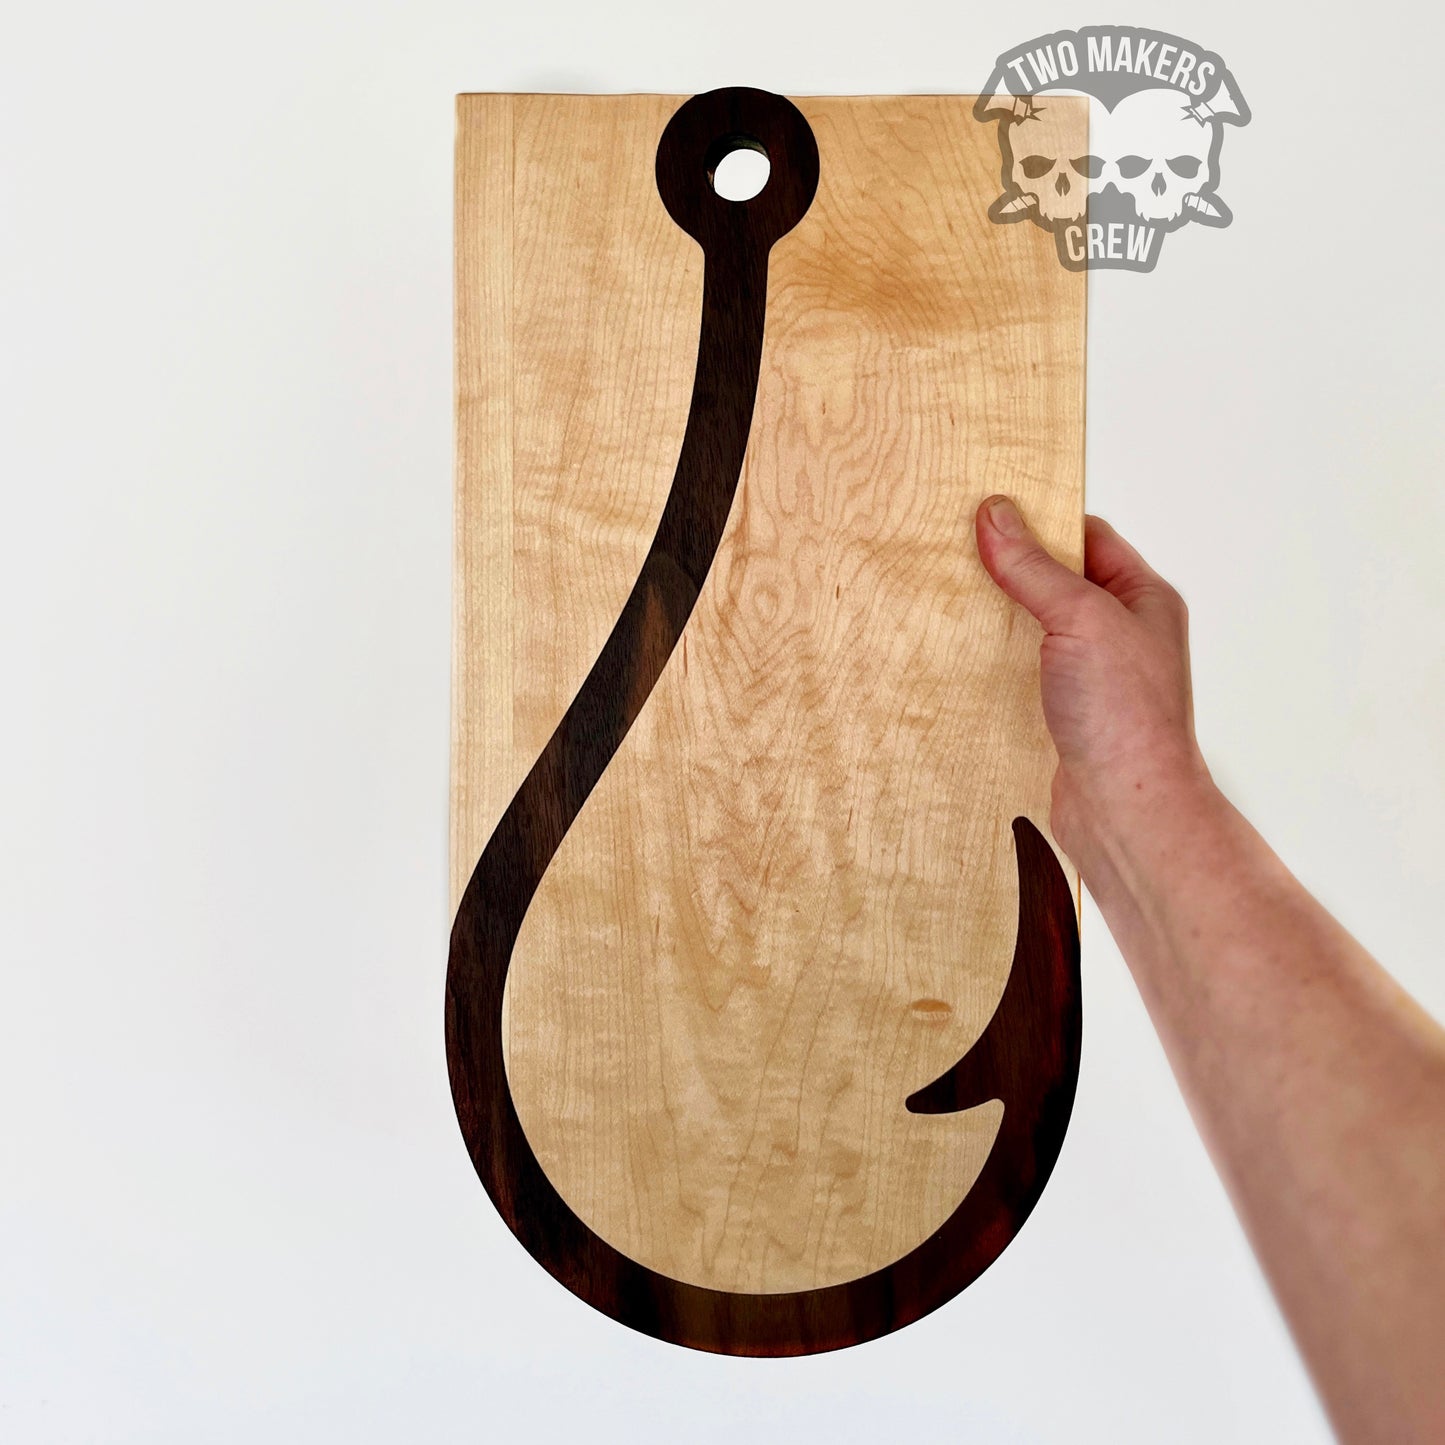 Hook, Line, and Server: The Catch-of-the-Day Kitchen Board